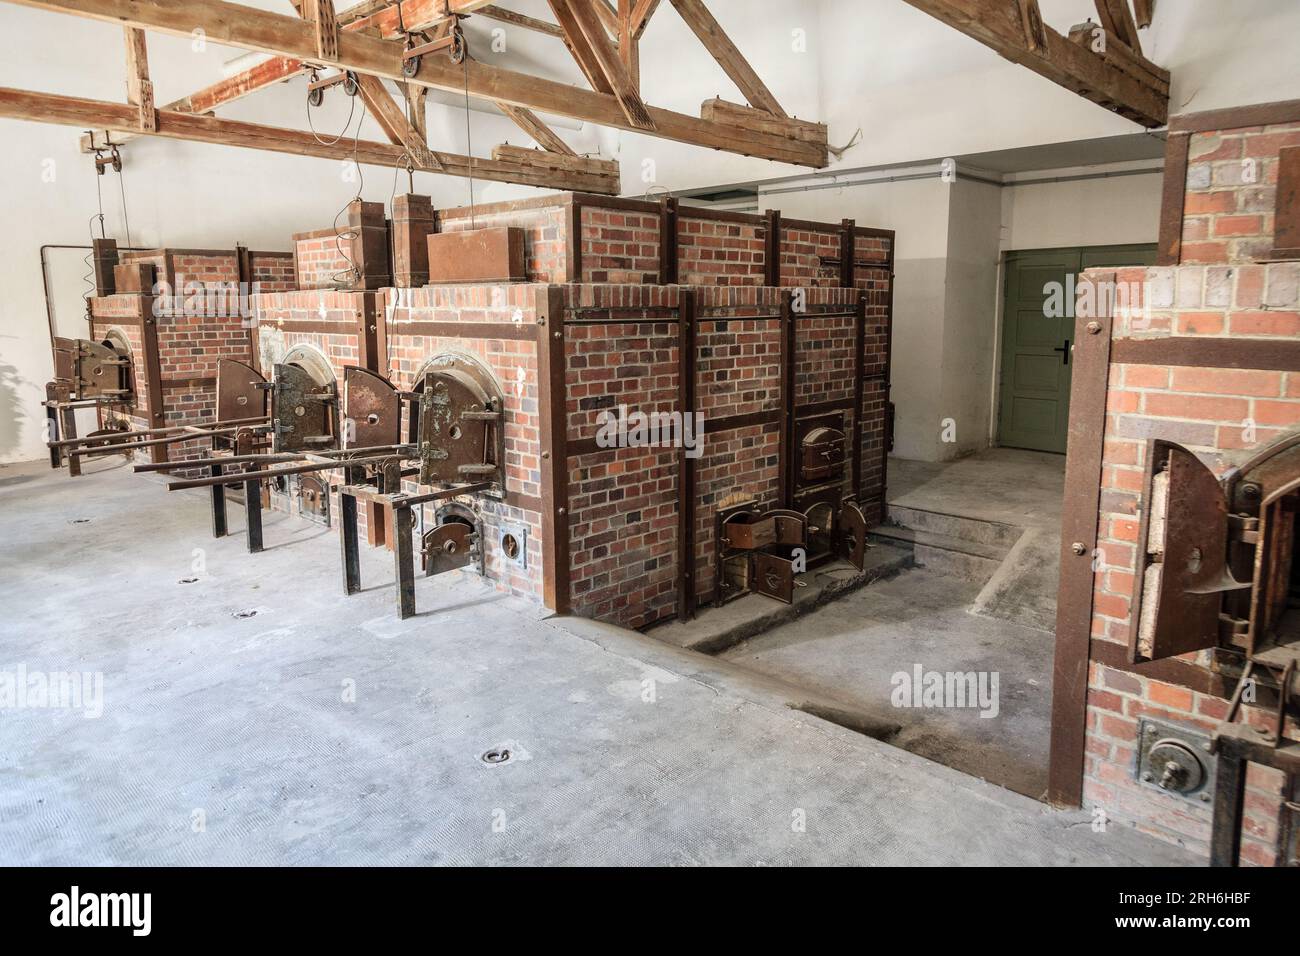 Dachau, Germany, September 30, 2015: ovens of the crematorium at the Dachau Concentration Camp memorial site. Stock Photo